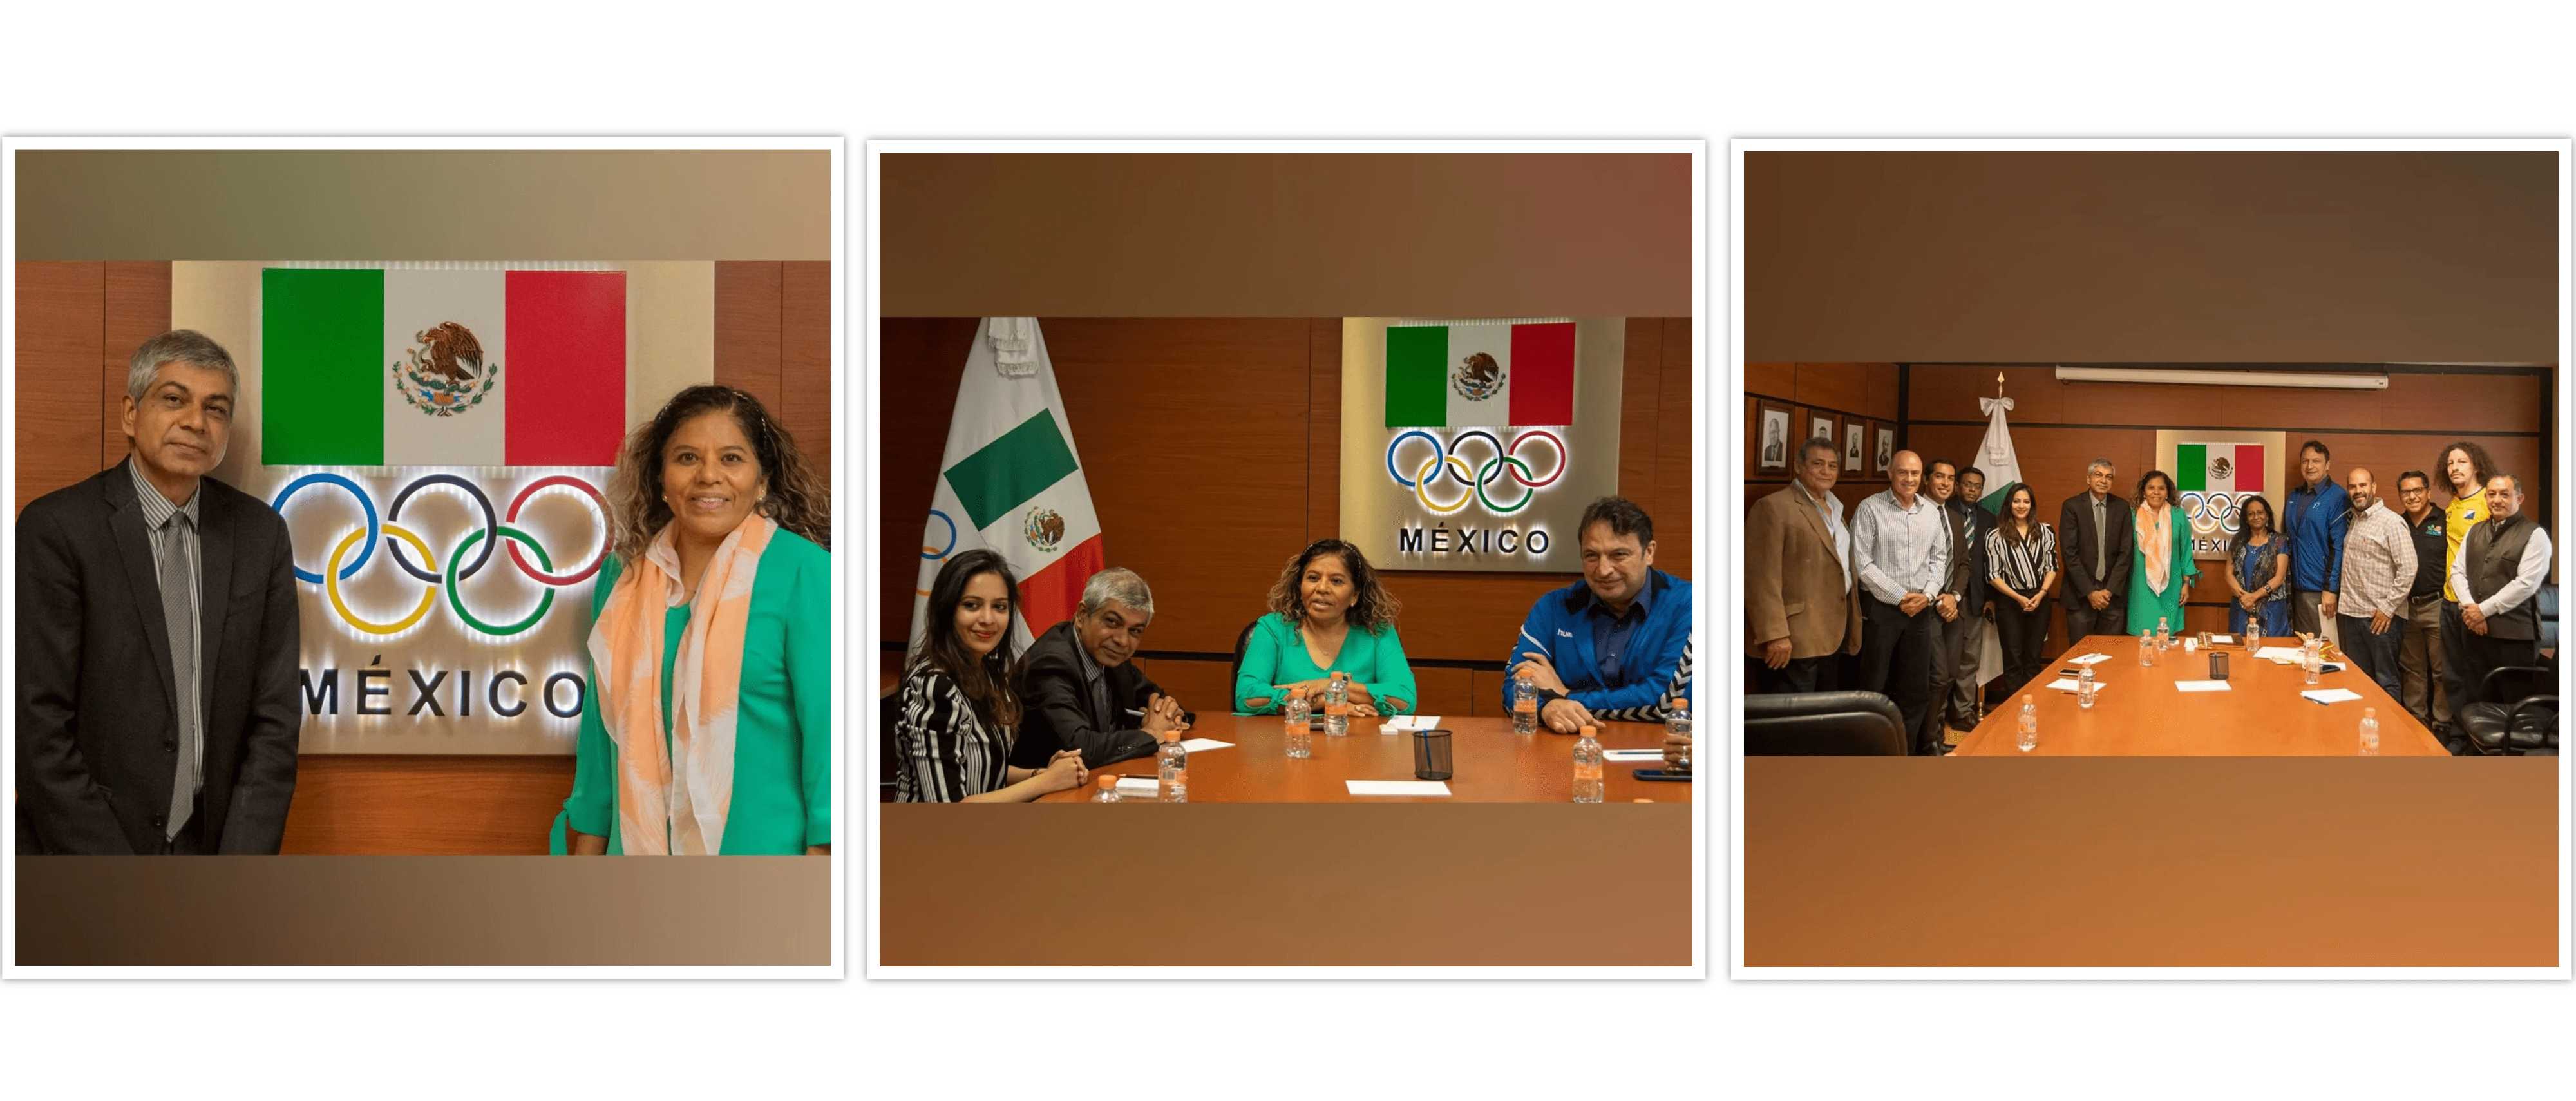  <div style="fcolor: #fff; font-weight: 600; font-size: 1.5em;">
<p style="font-size: 13.8px;">Ambassador Pankaj Sharma and Embassy officials visited the impressive Mexican Olympic Committee.

Honored to have been received by Mexican Olympic Committee's first female President & Hon'ble Deputy-Ms.Maria José Alcalá. Discussed fostering of greater engagement & cooperation in sports between India & Mexico.

<br /><span style="text-align: center;"> 26 May 2022</span></p>
</div>

